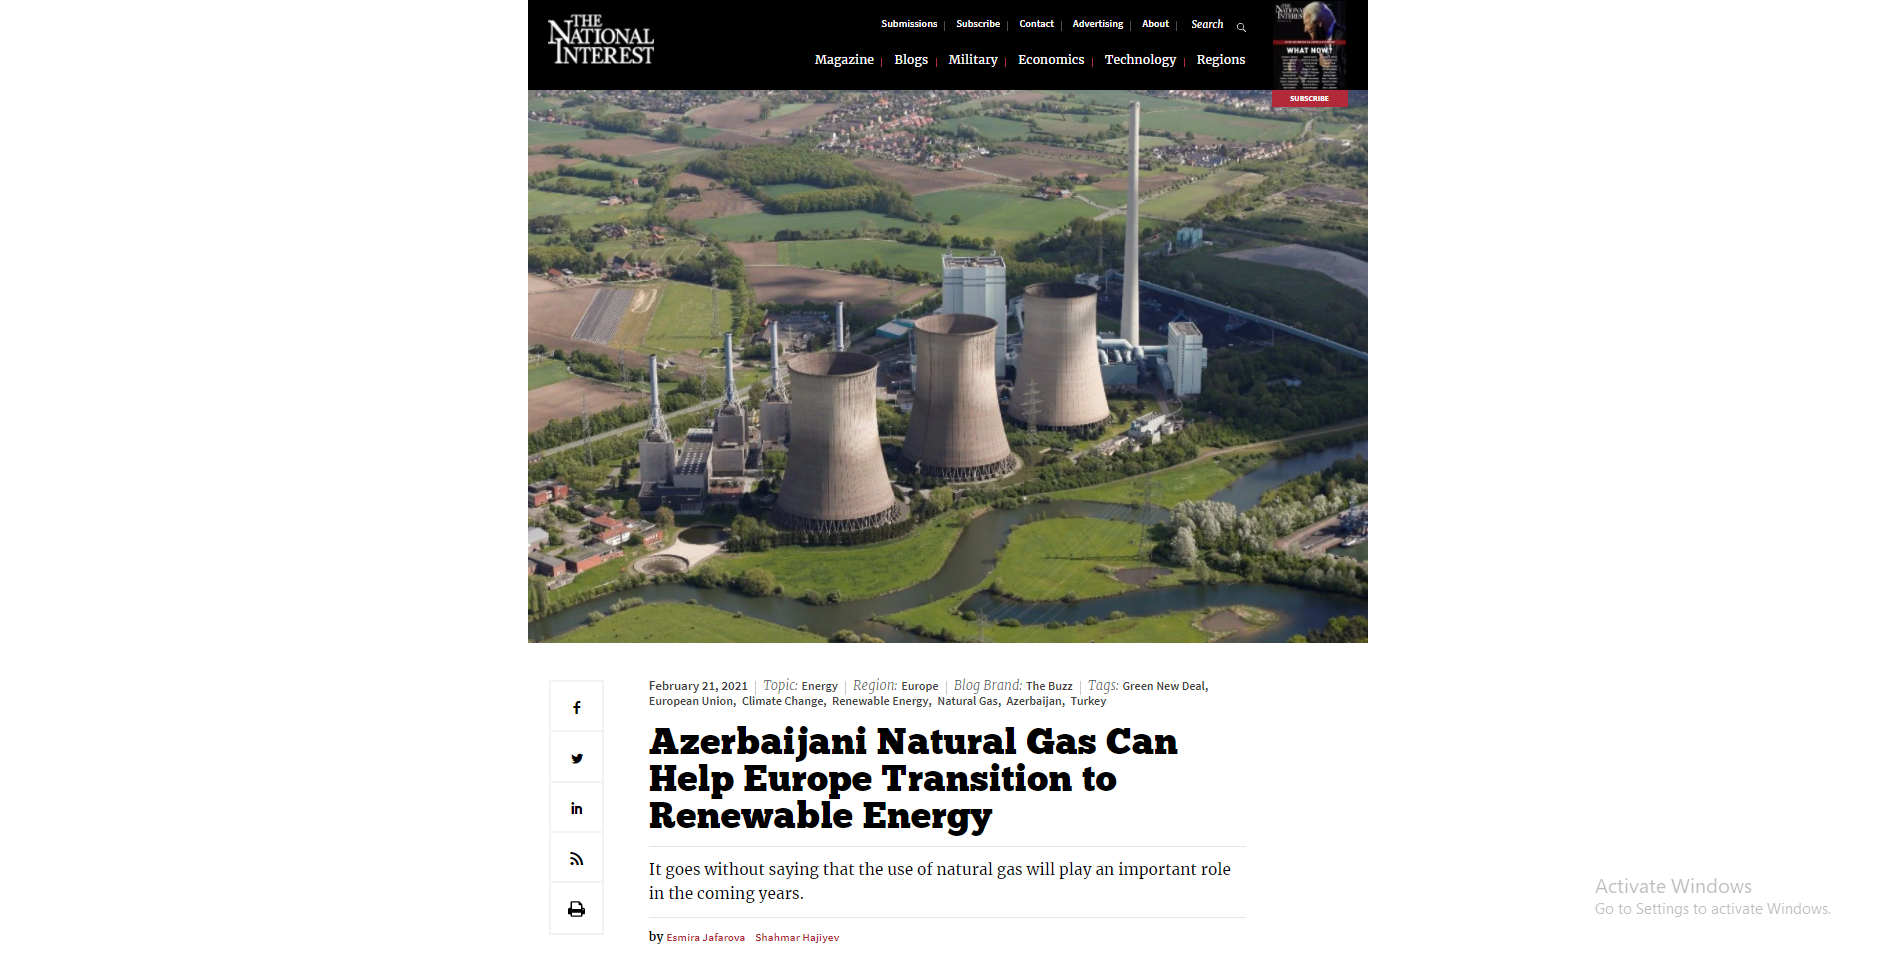 Azerbaijani Natural Gas Can Help Europe Transition to Renewable Energy